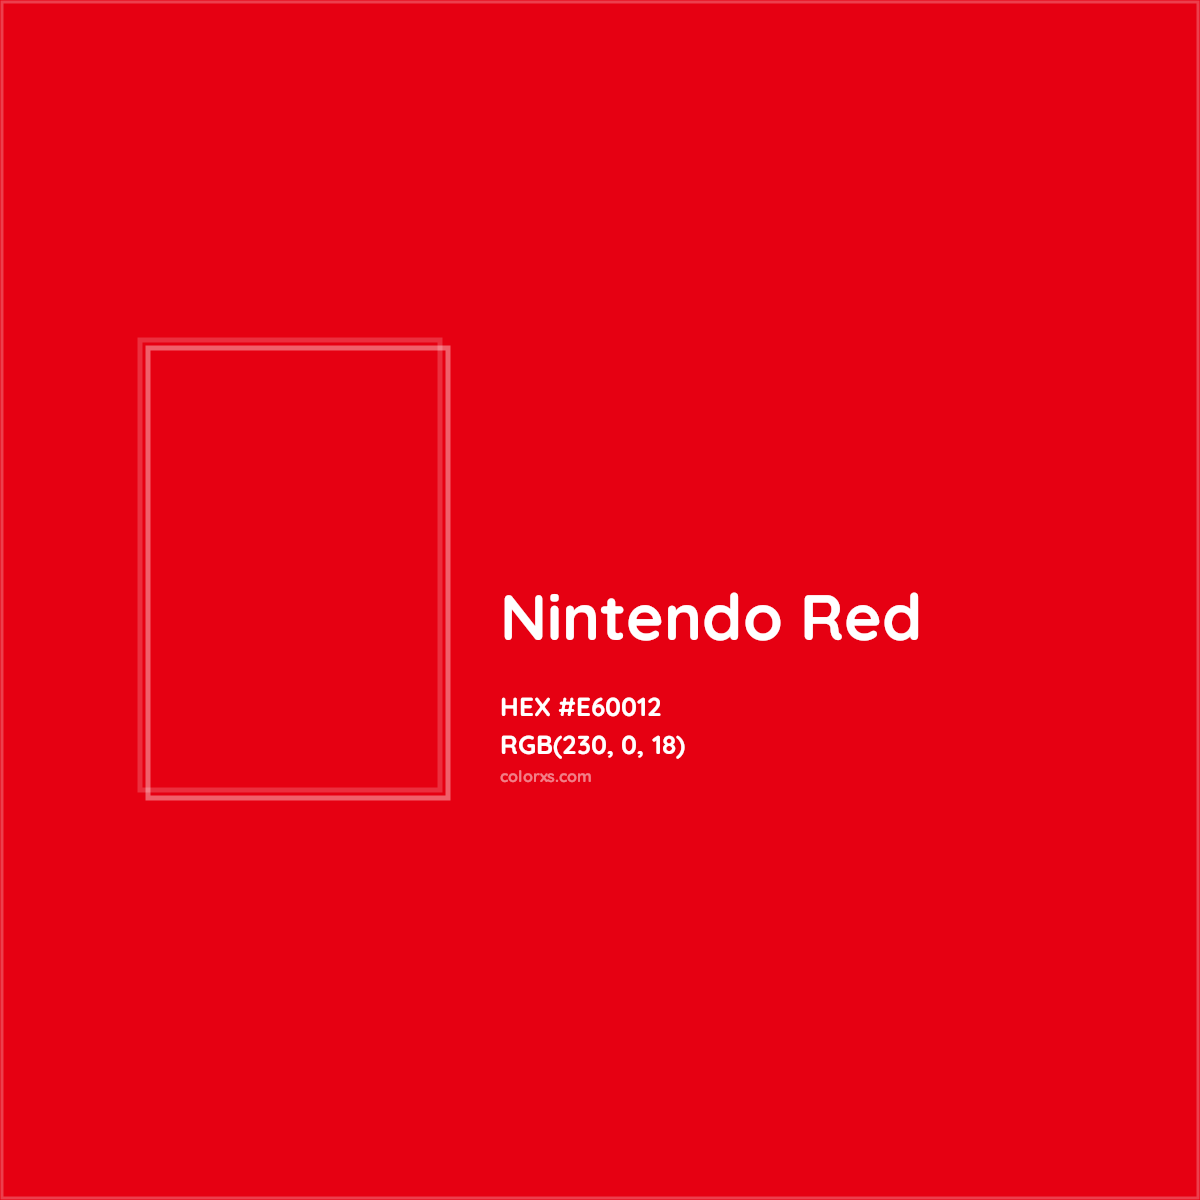 HEX #E60012 Nintendo Red Other Brand - Color Code